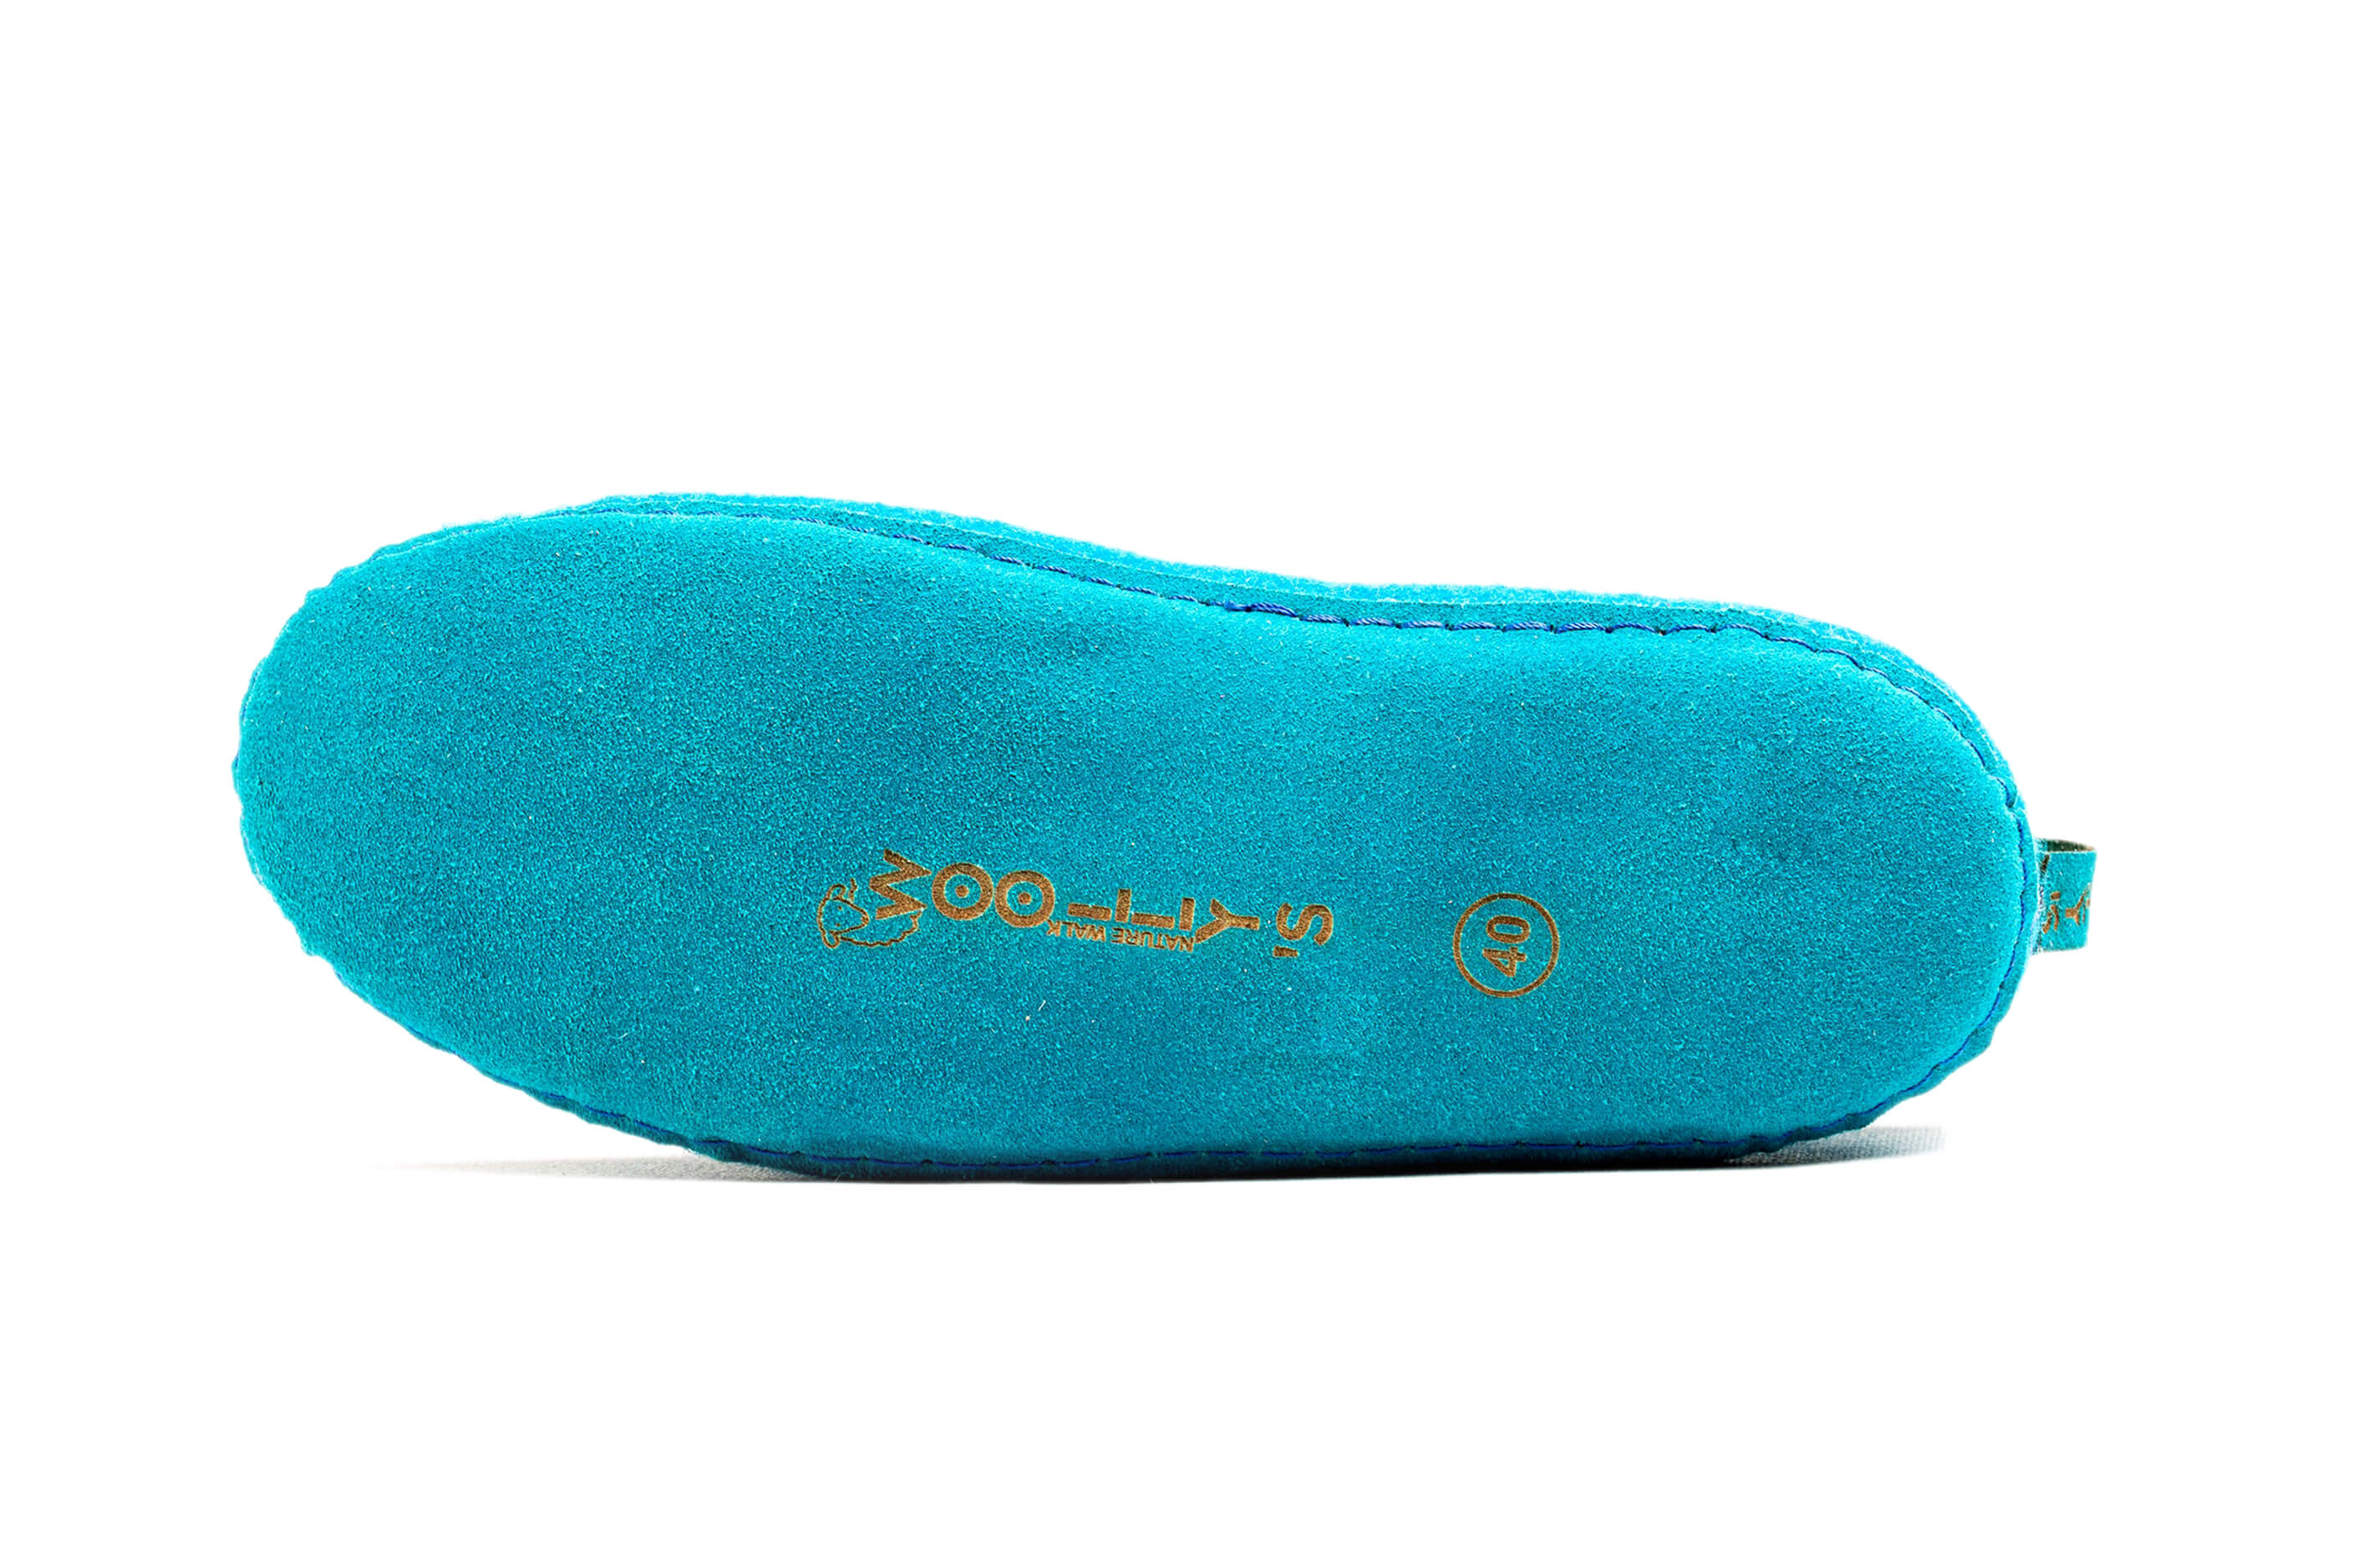 Indoor Shoes With Leather Sole - Turquoise